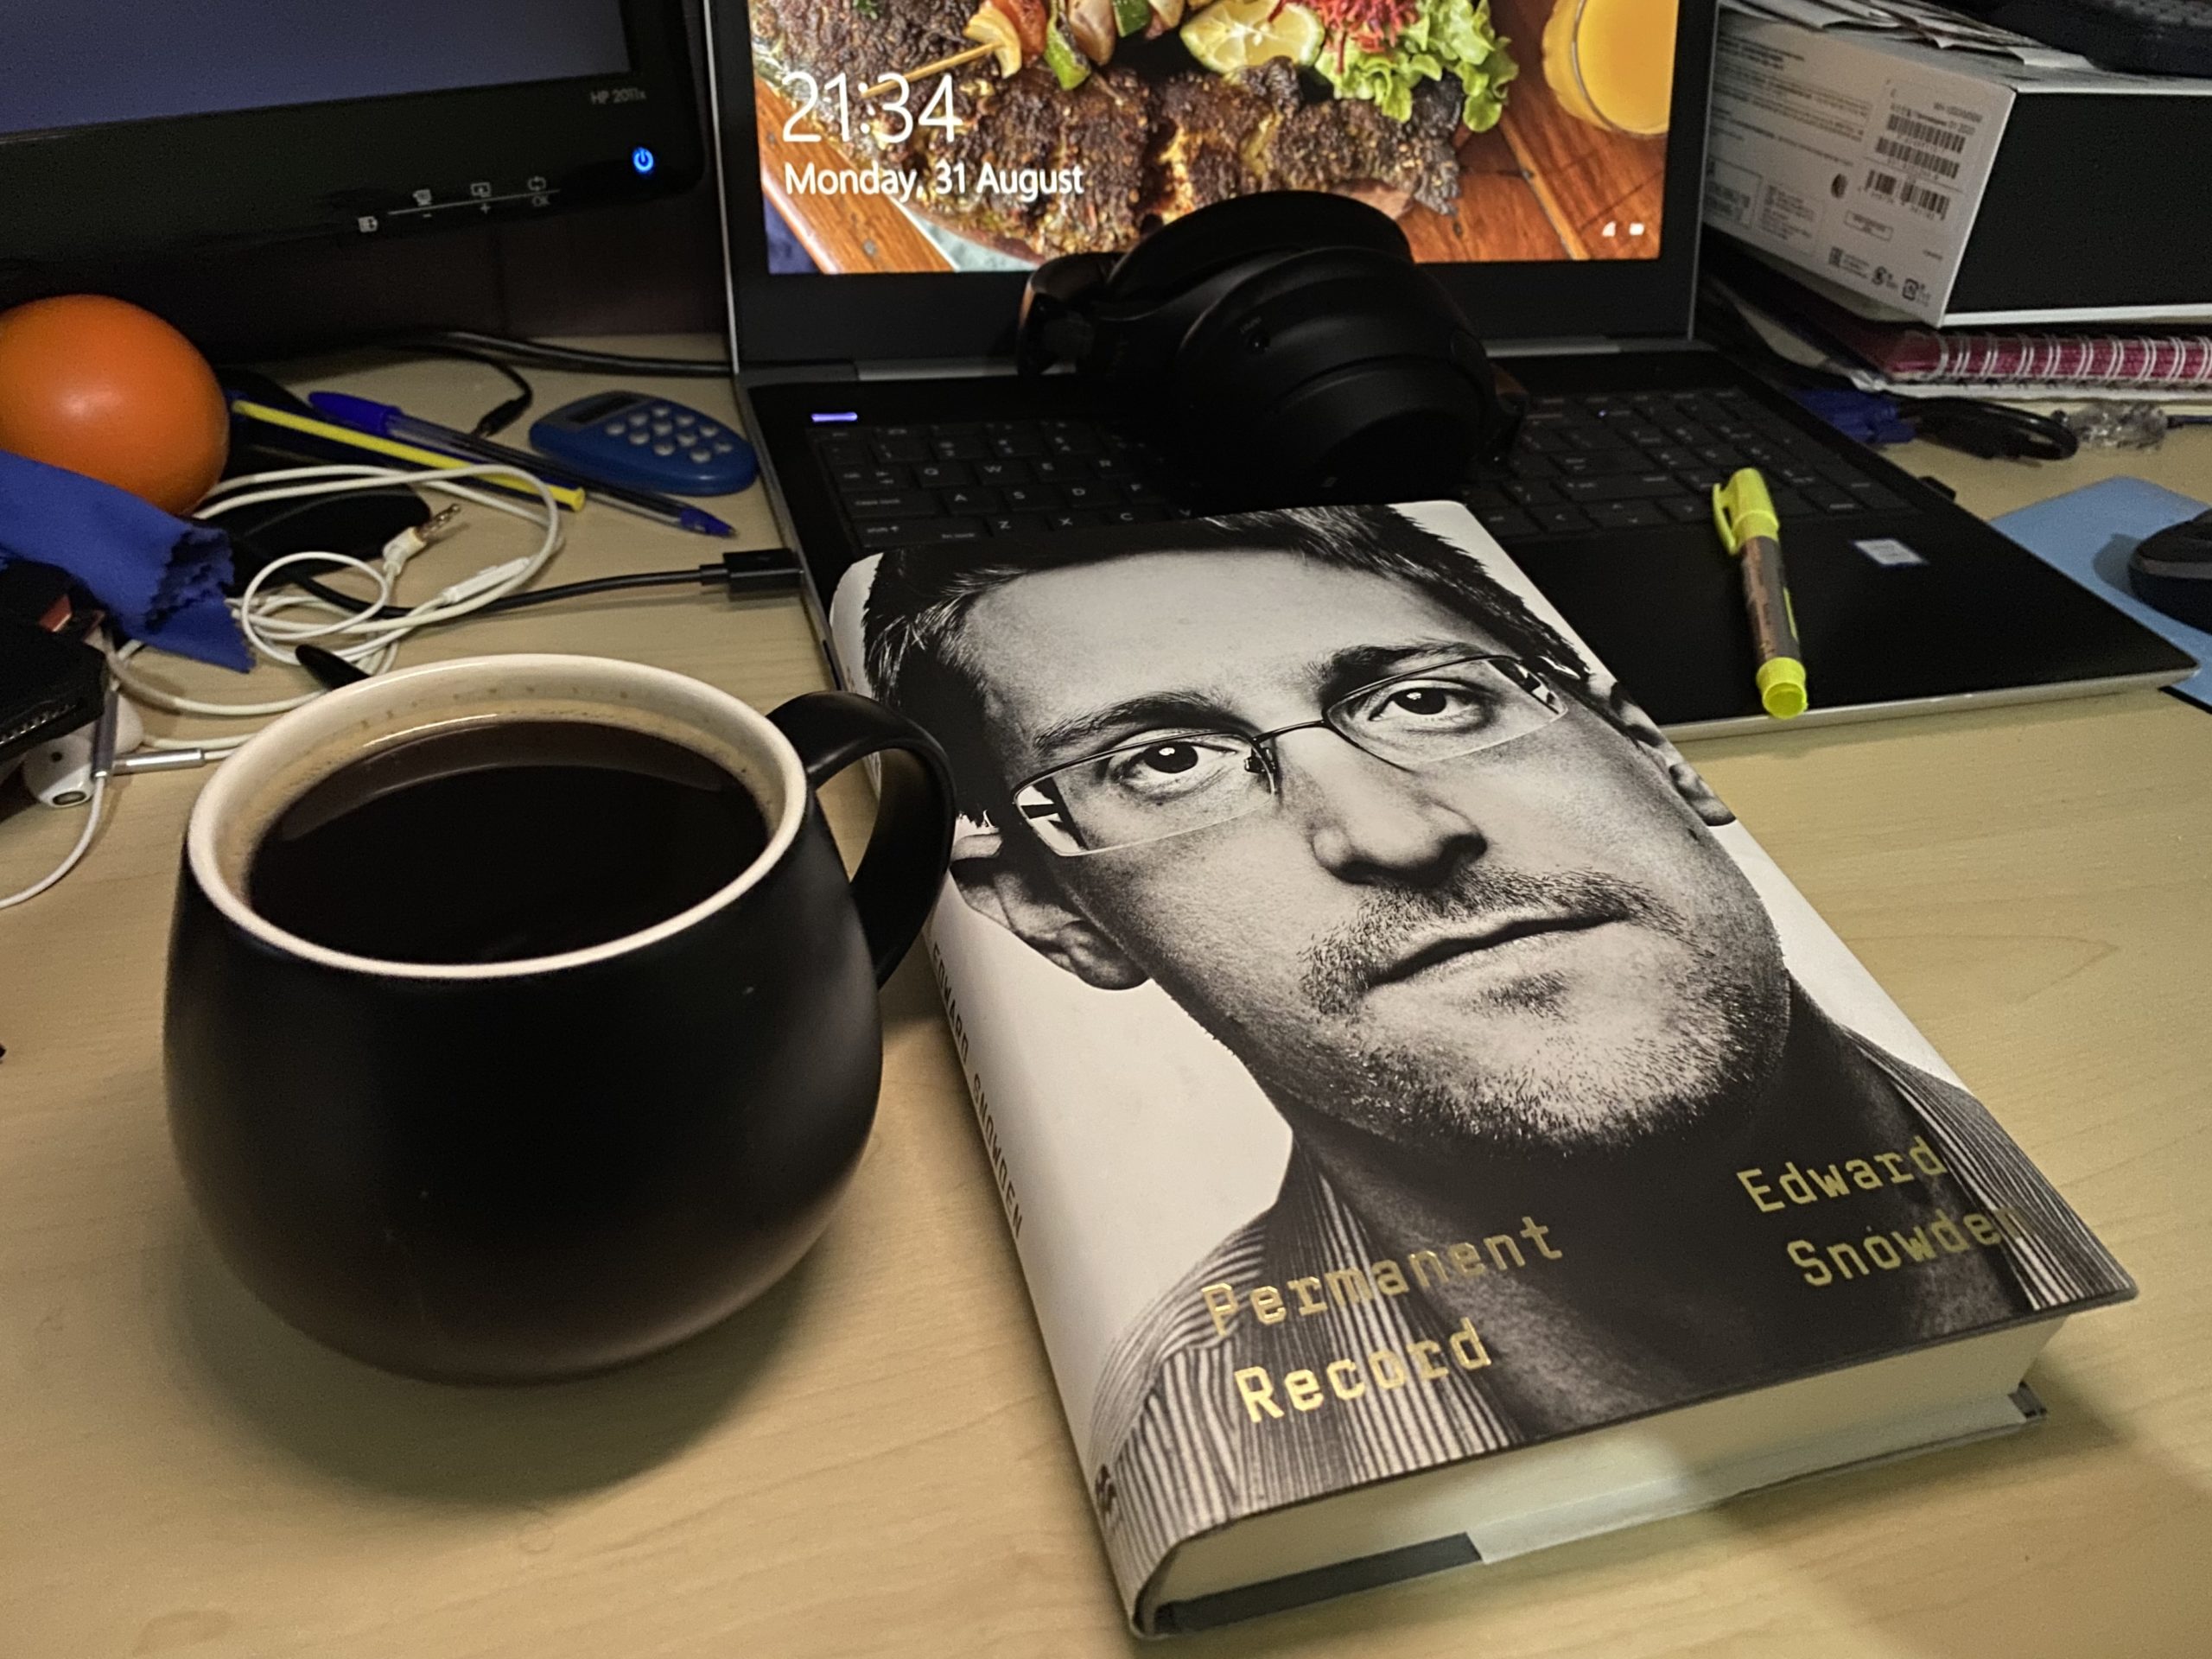 Copy of the Permanent Record by Edward Snowden on an office desk with a cup of coffee on the side